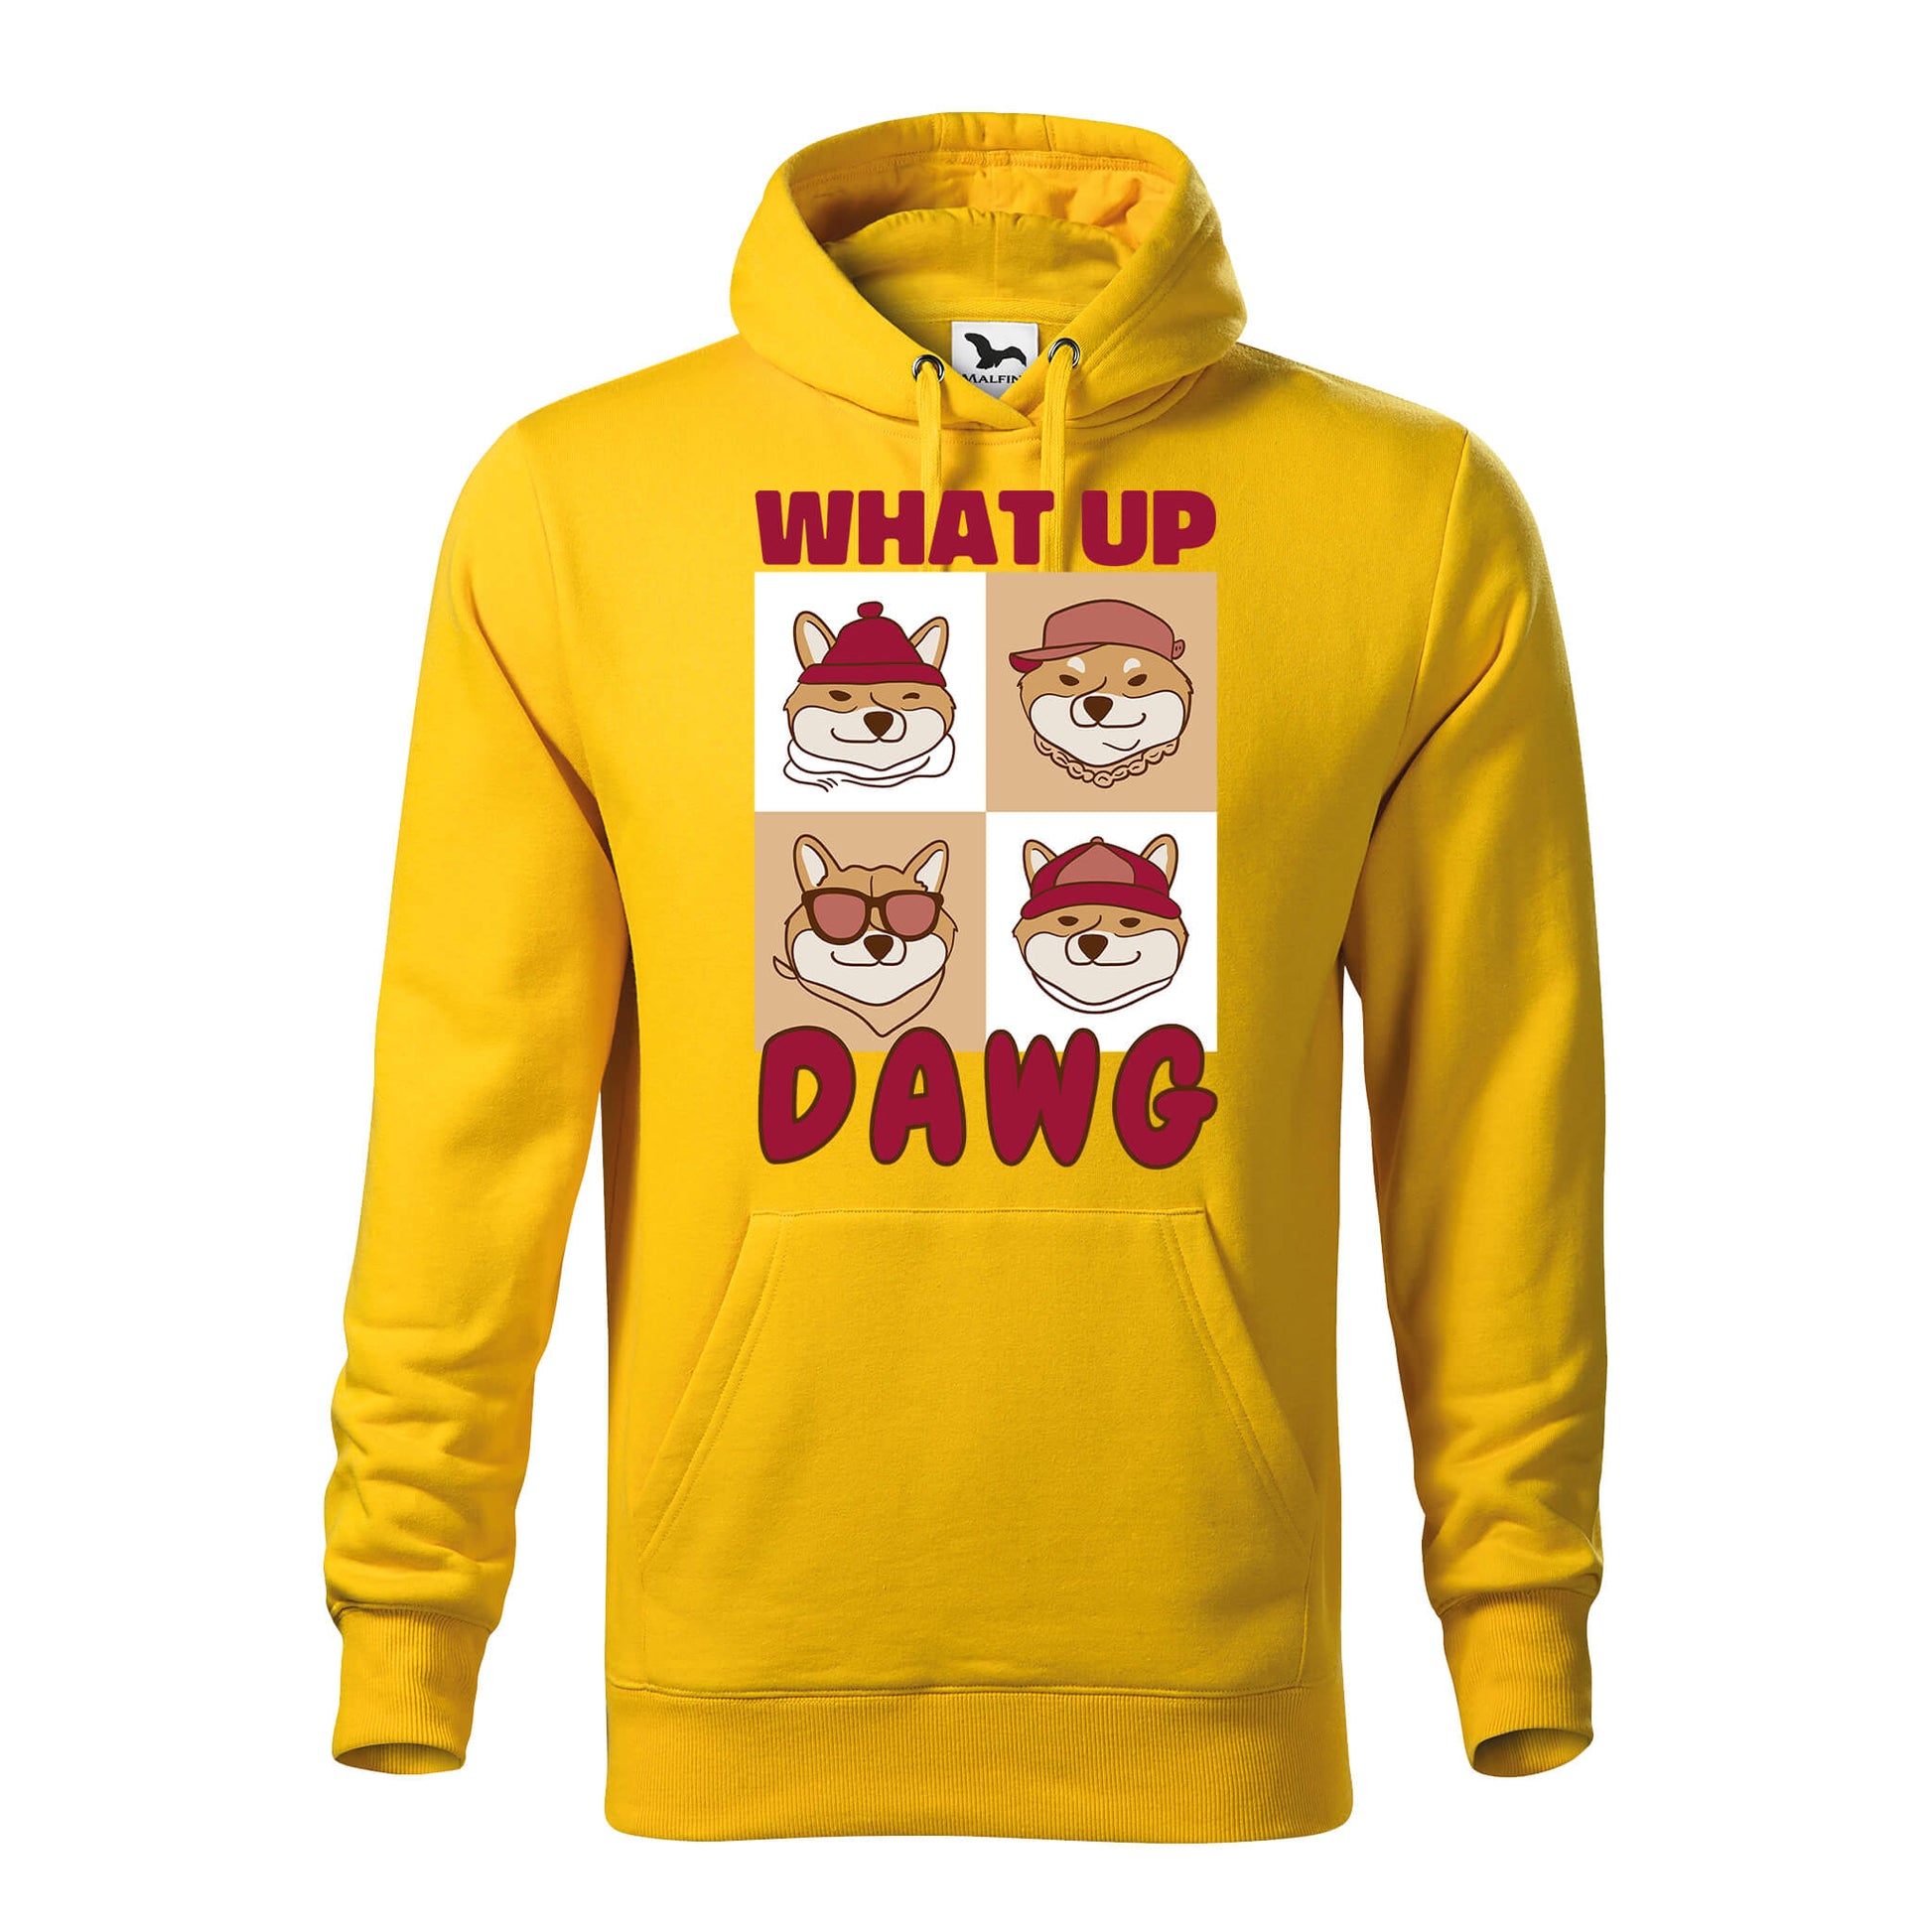 What up dawg hoodie - rvdesignprint